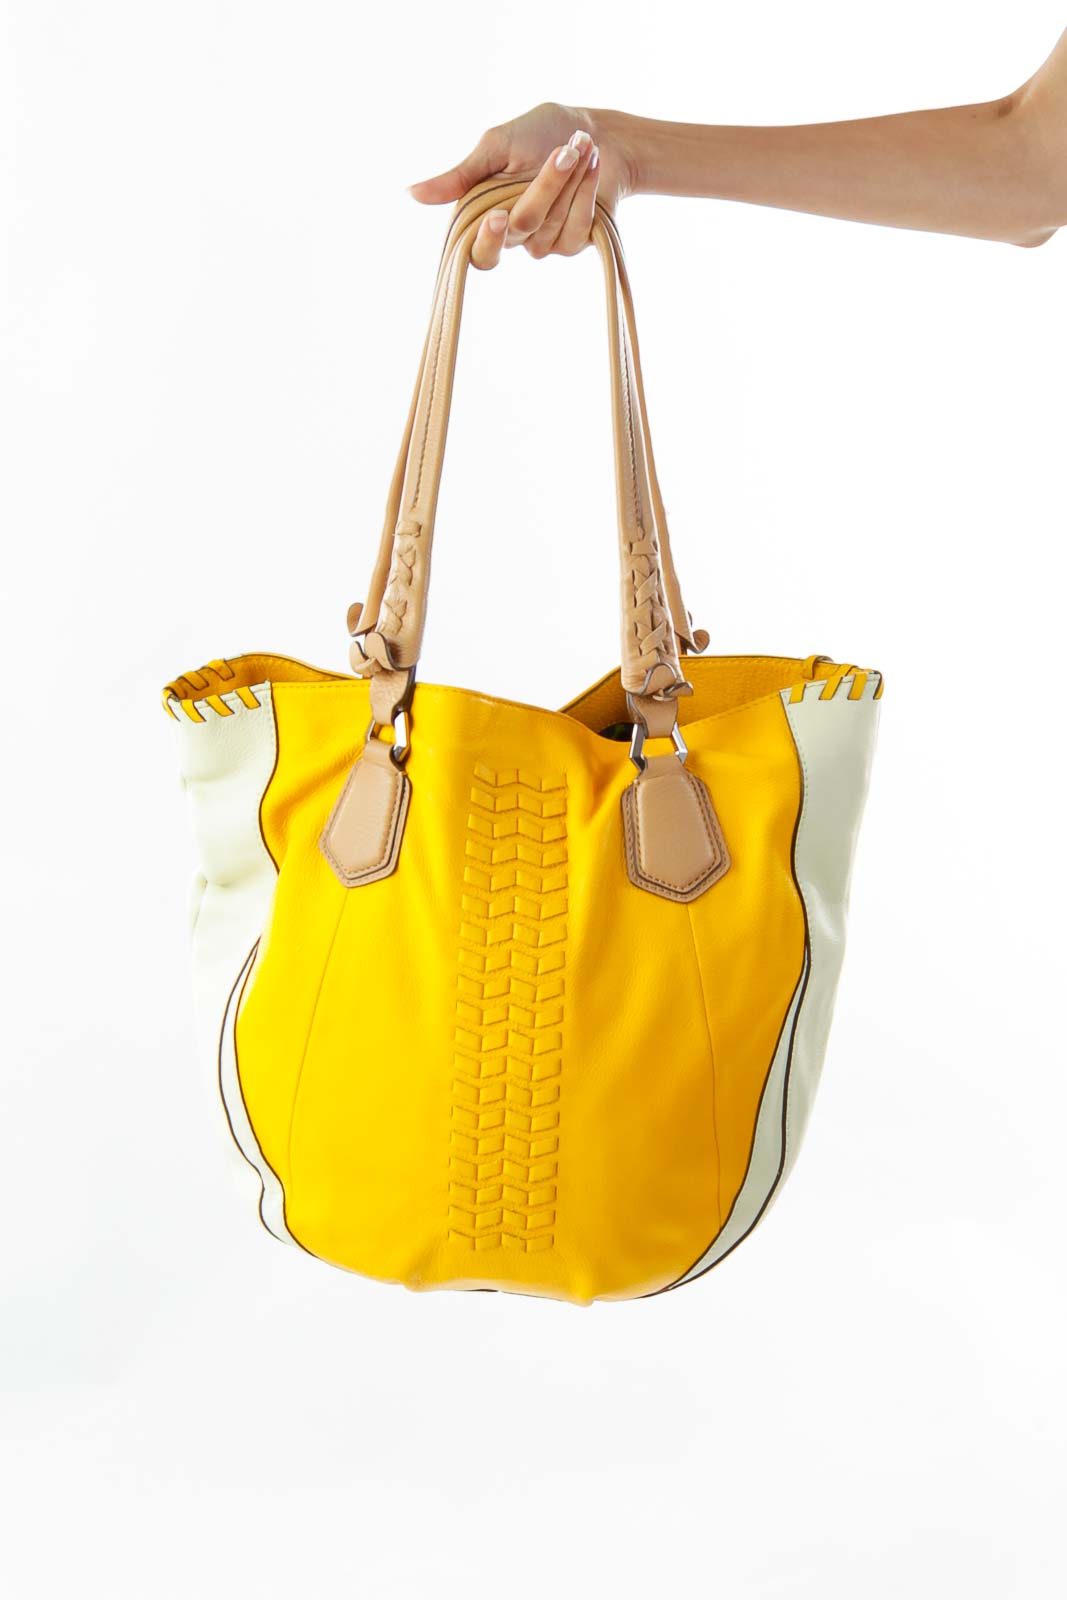 Yellow Cream Braided Leather Shoulder Bag Front